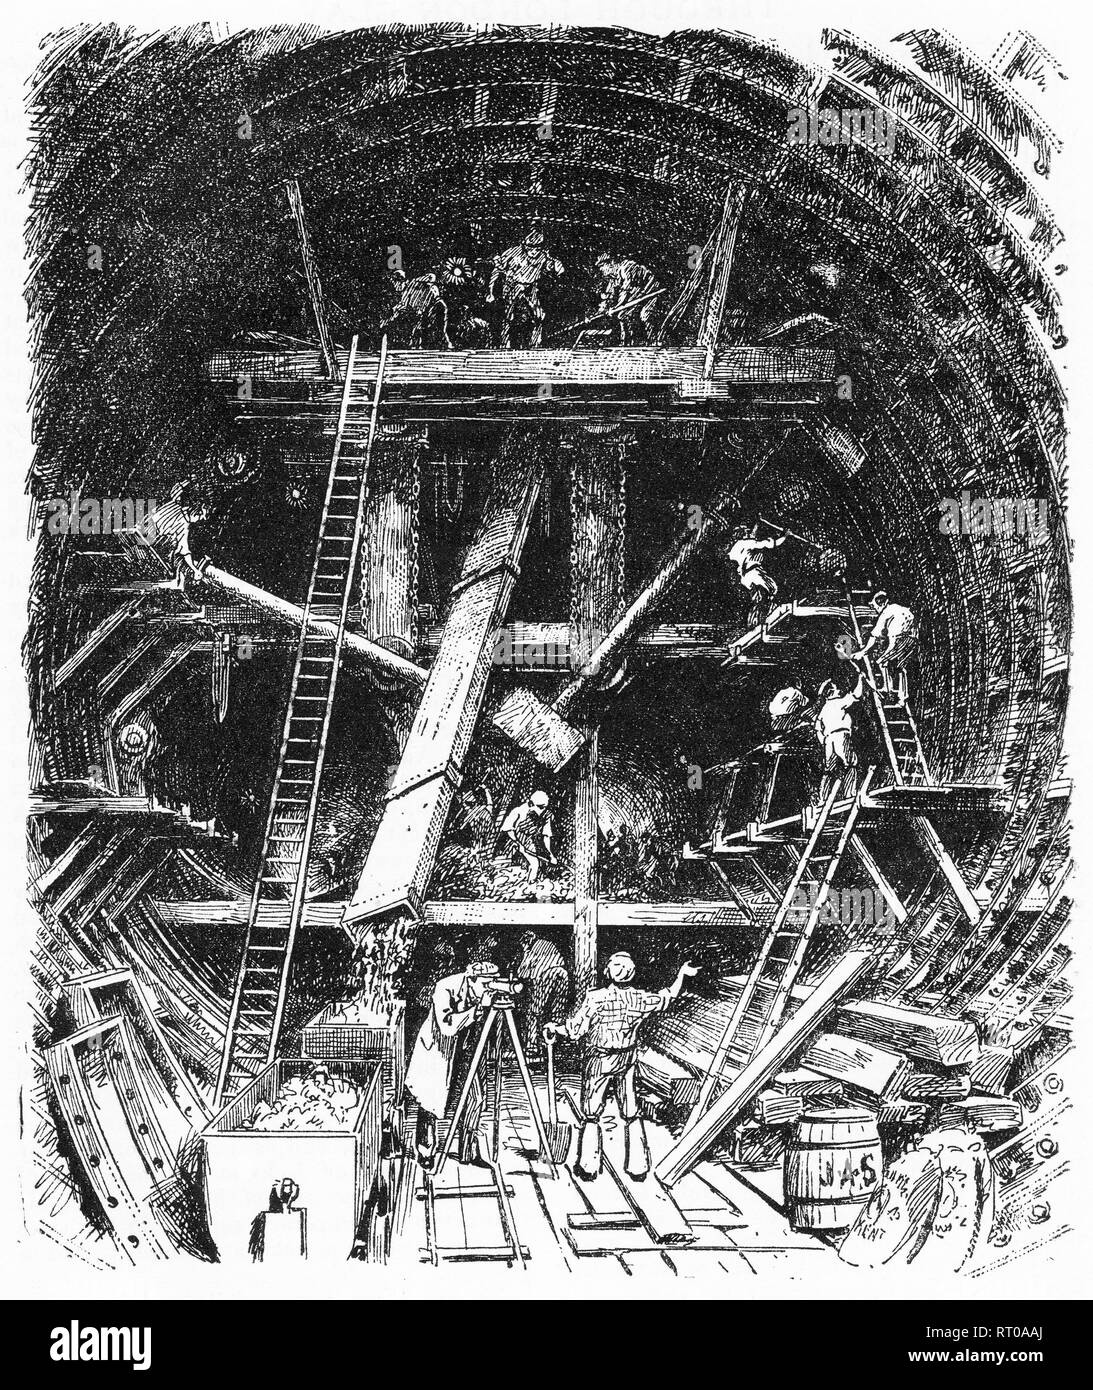 Engraving of men building the London underground railway system. From Chatterbox magazine, 1905 Stock Photo